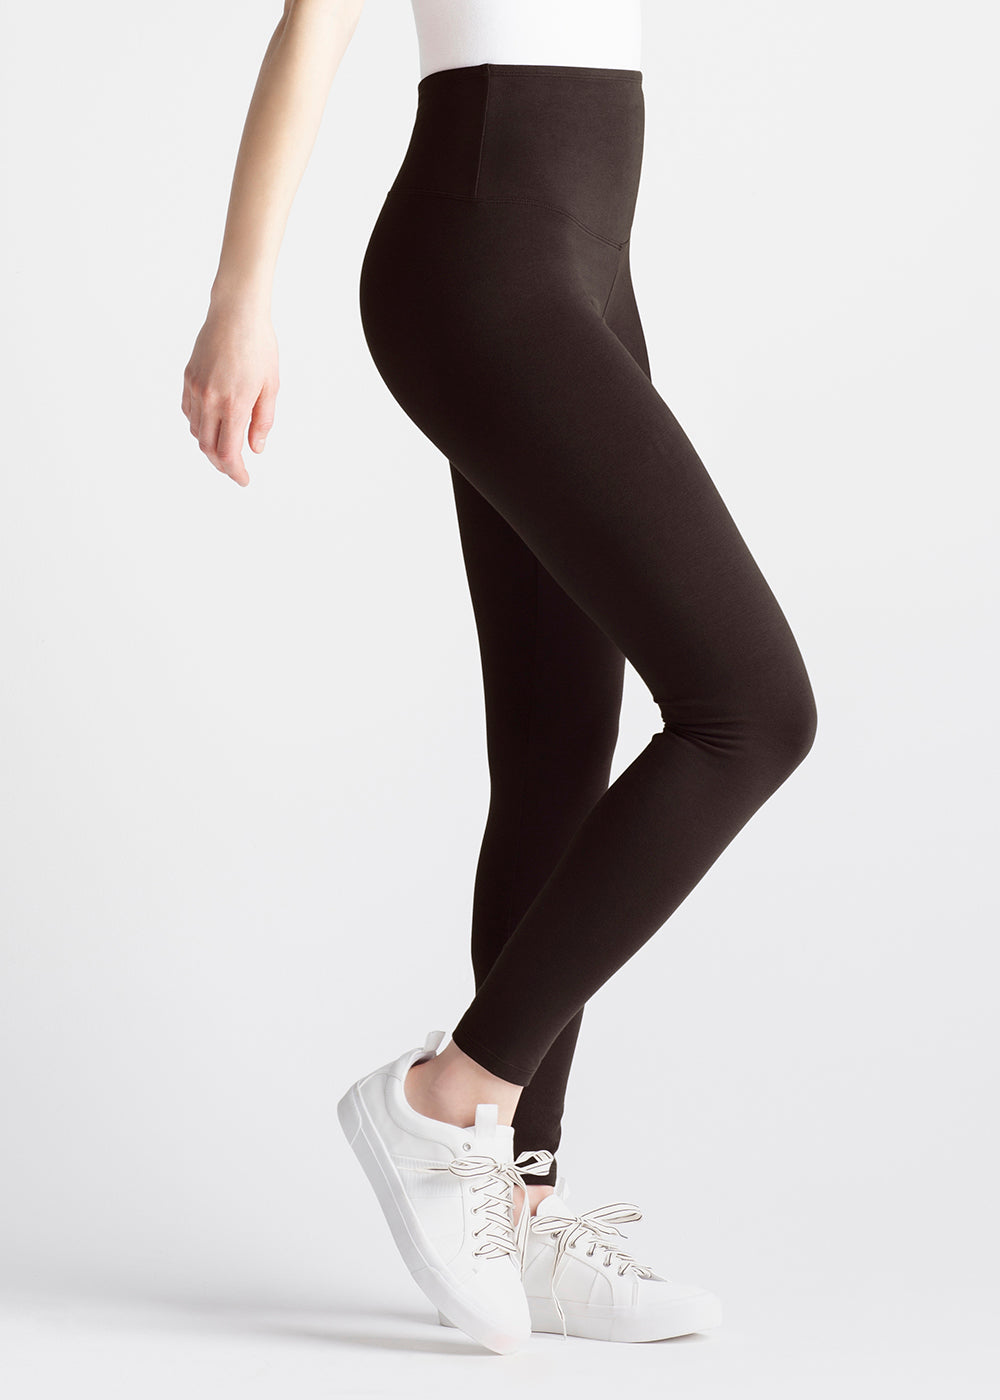 Rachel Shaping Legging - Cotton Stretch from Yummie in Mole Brown  - 1